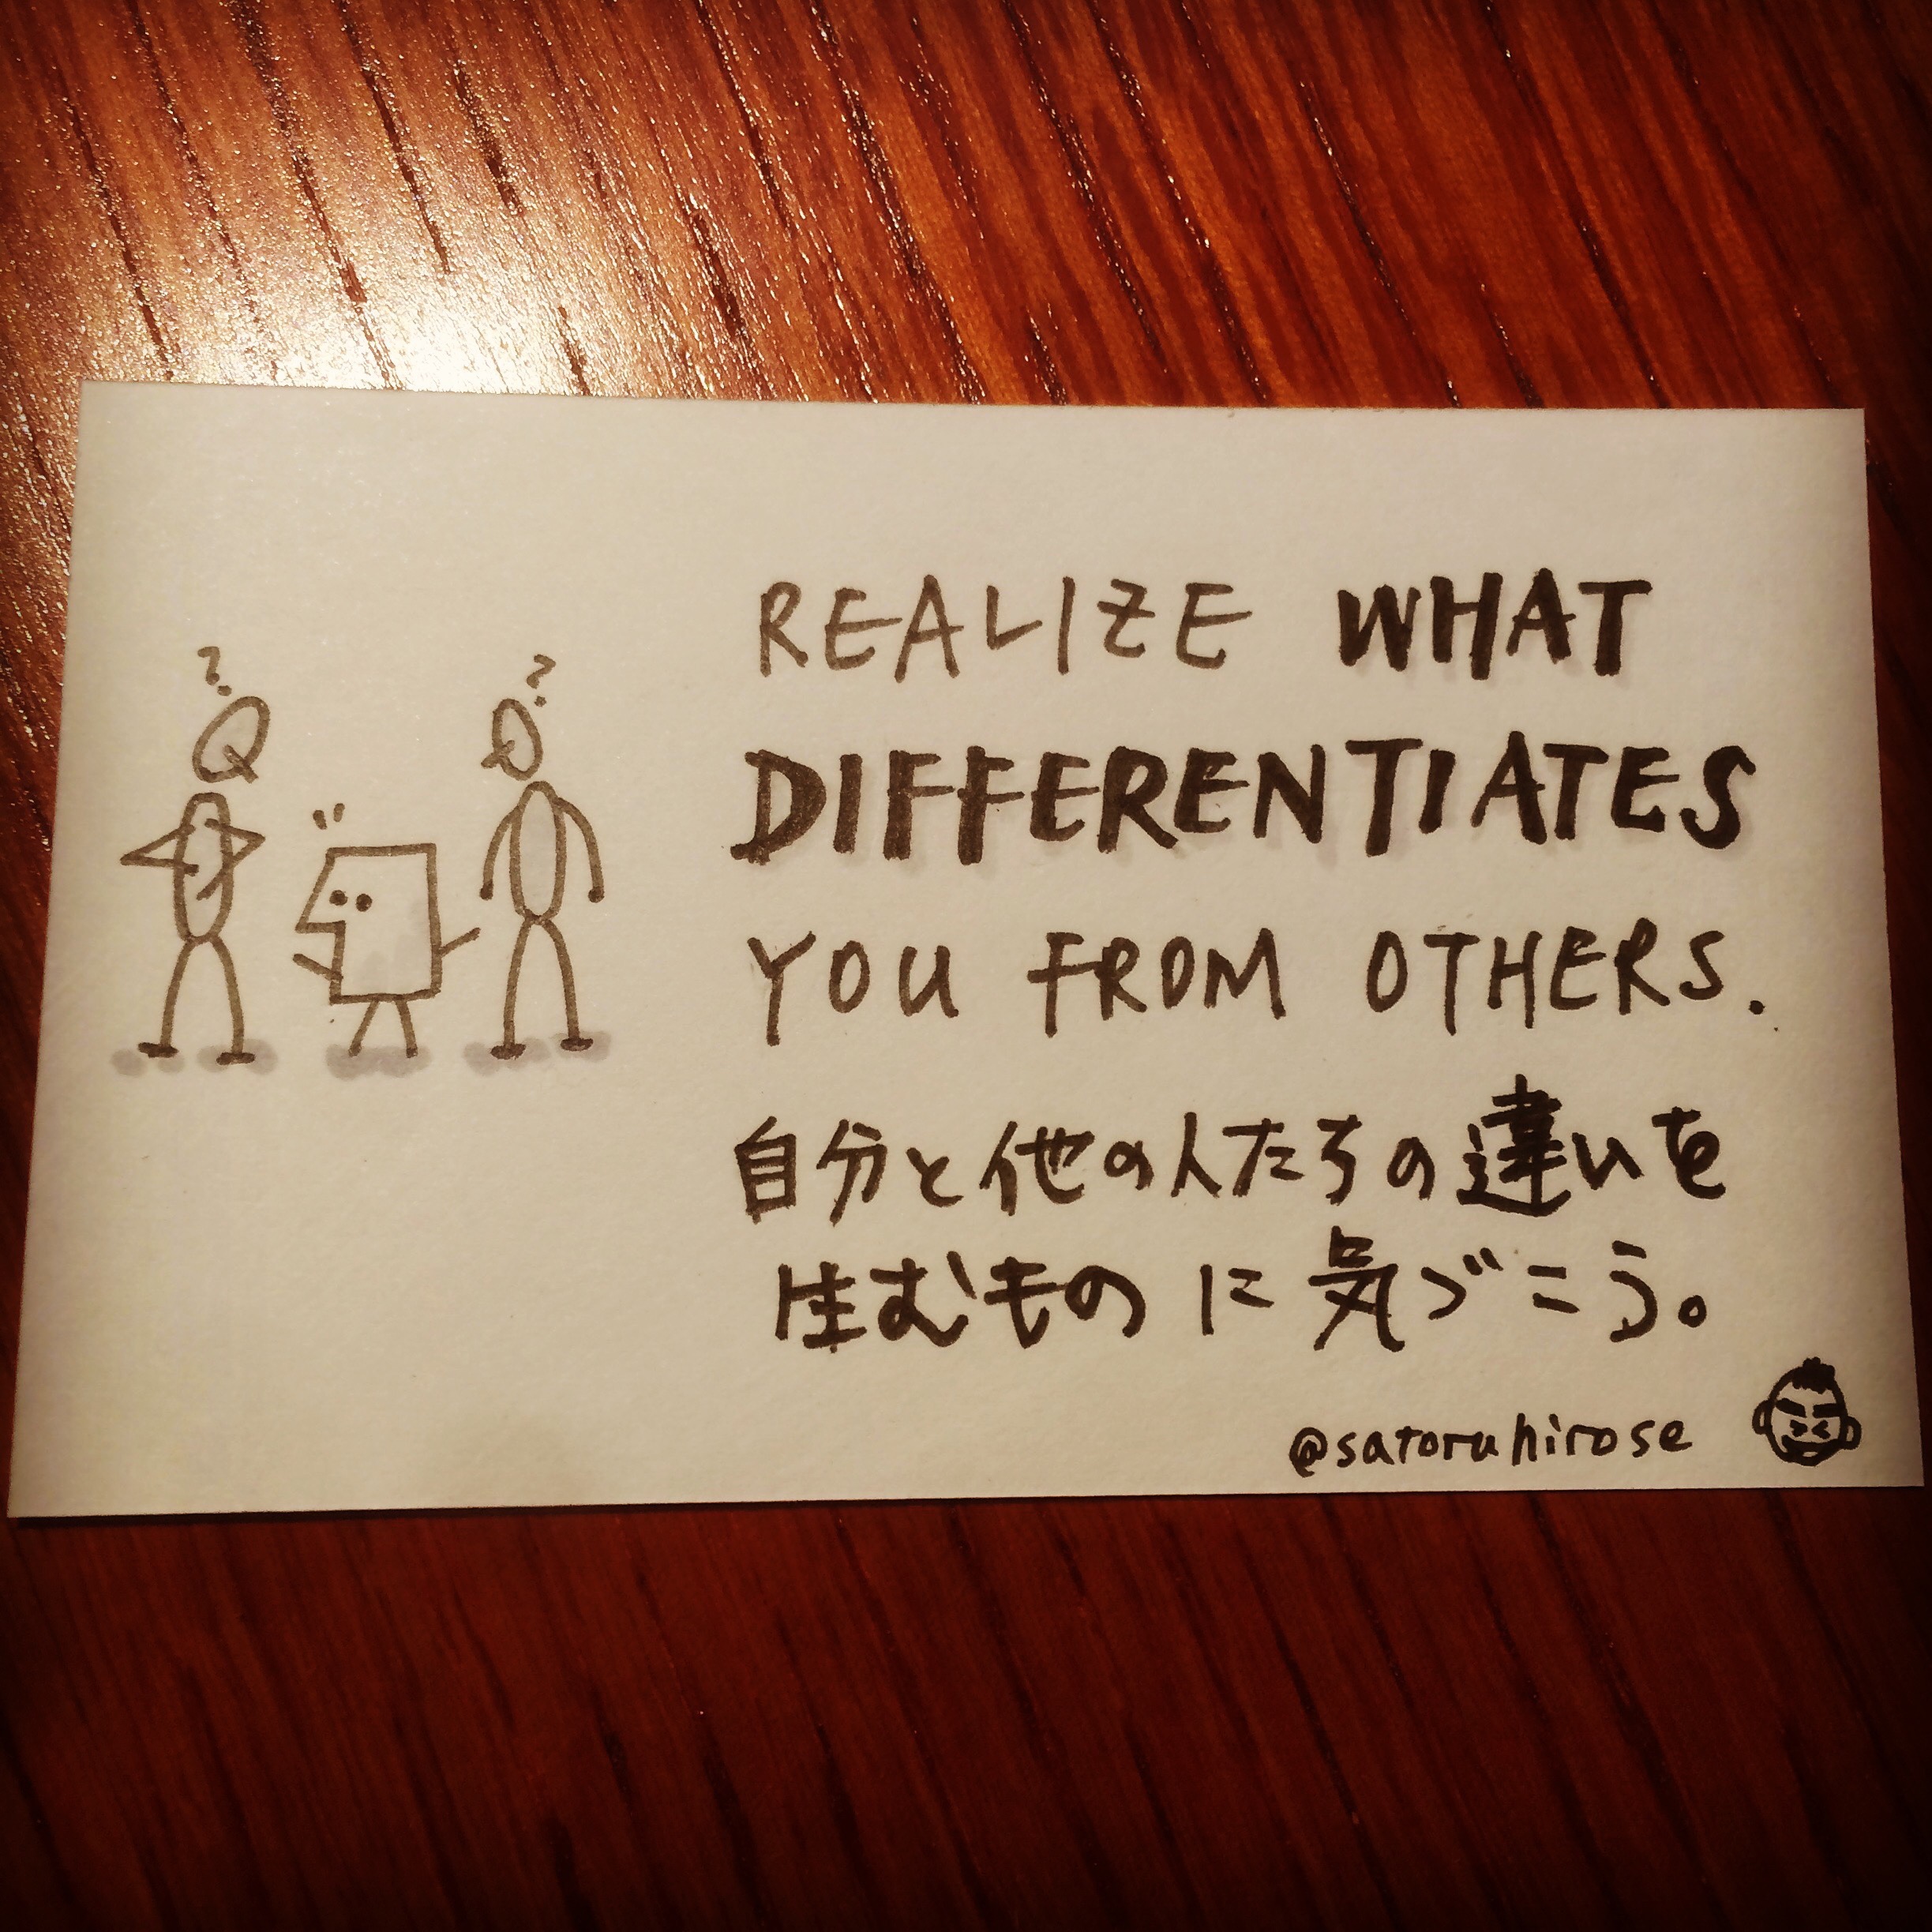 Realize what differentiates you from others.